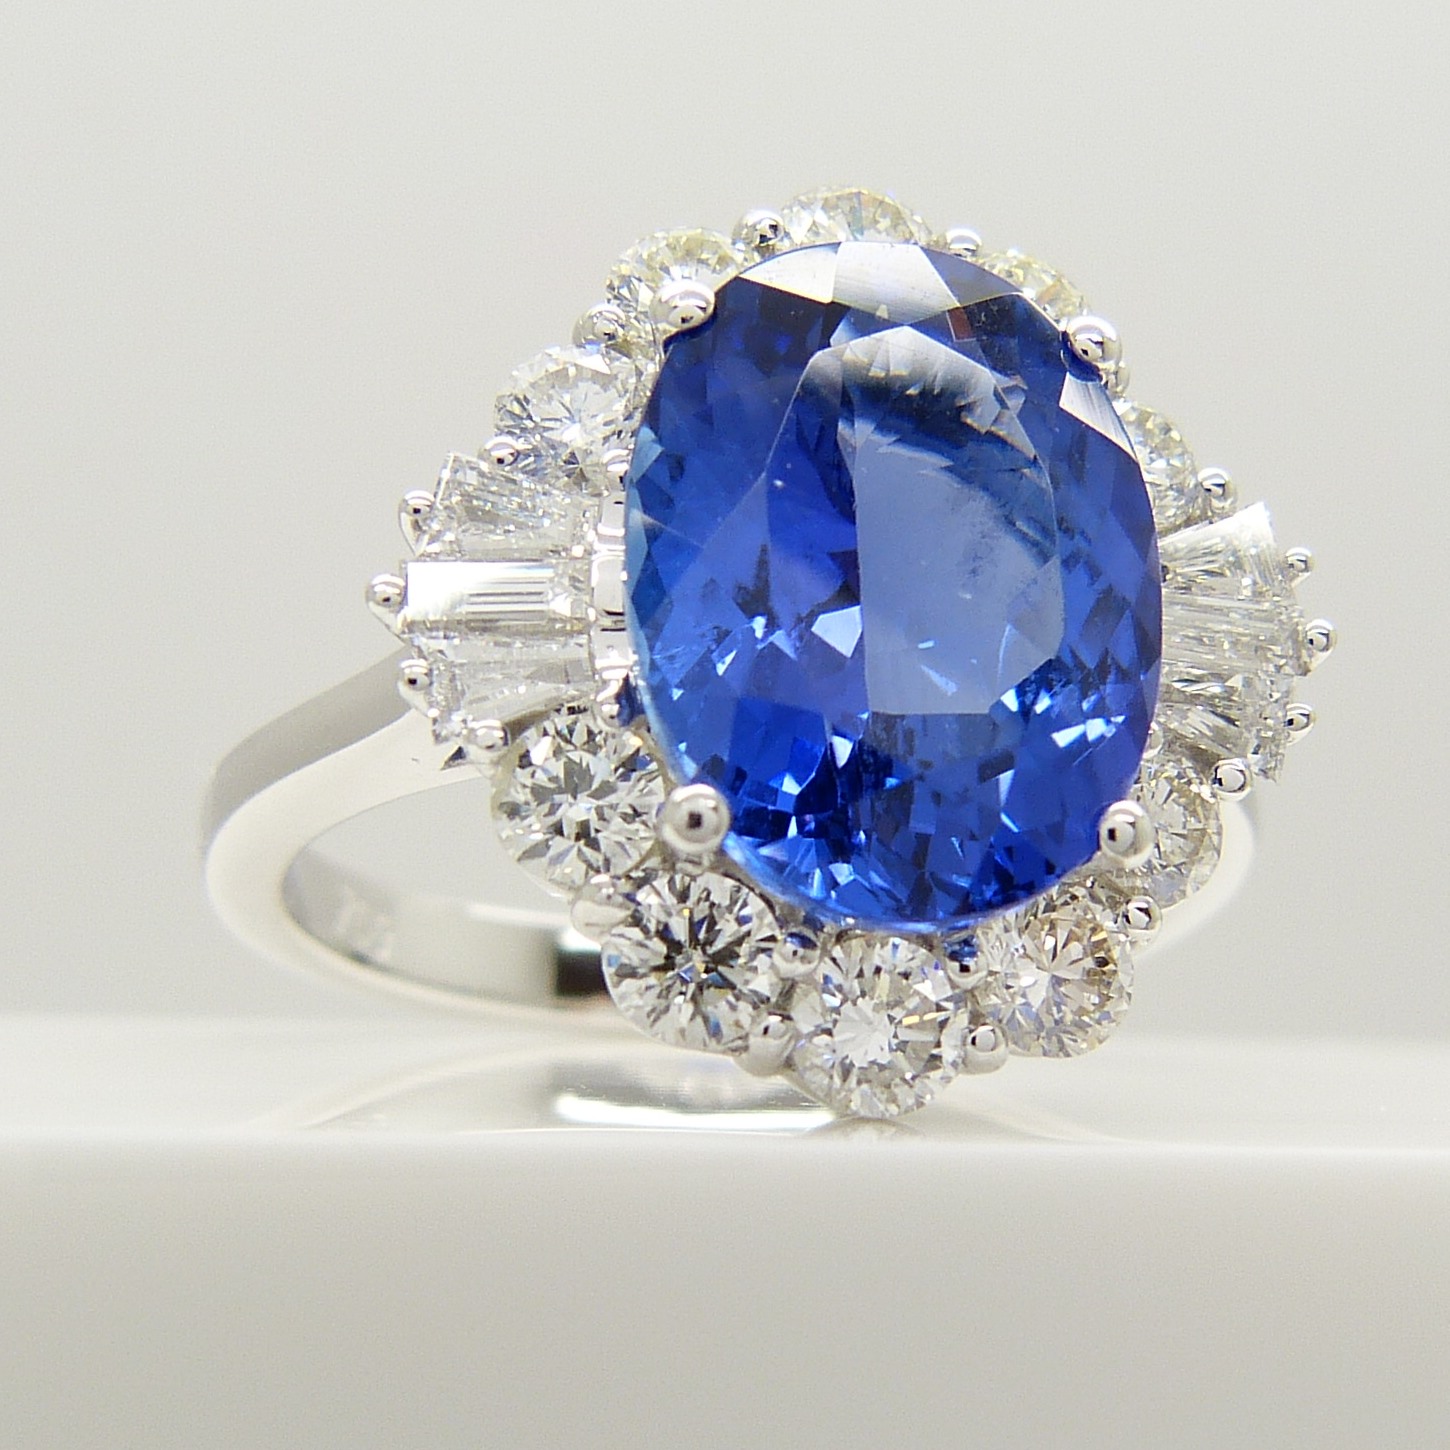 A stunning, certificated loupe-clean large tanzanite and diamond statement ring in 18ct white gold